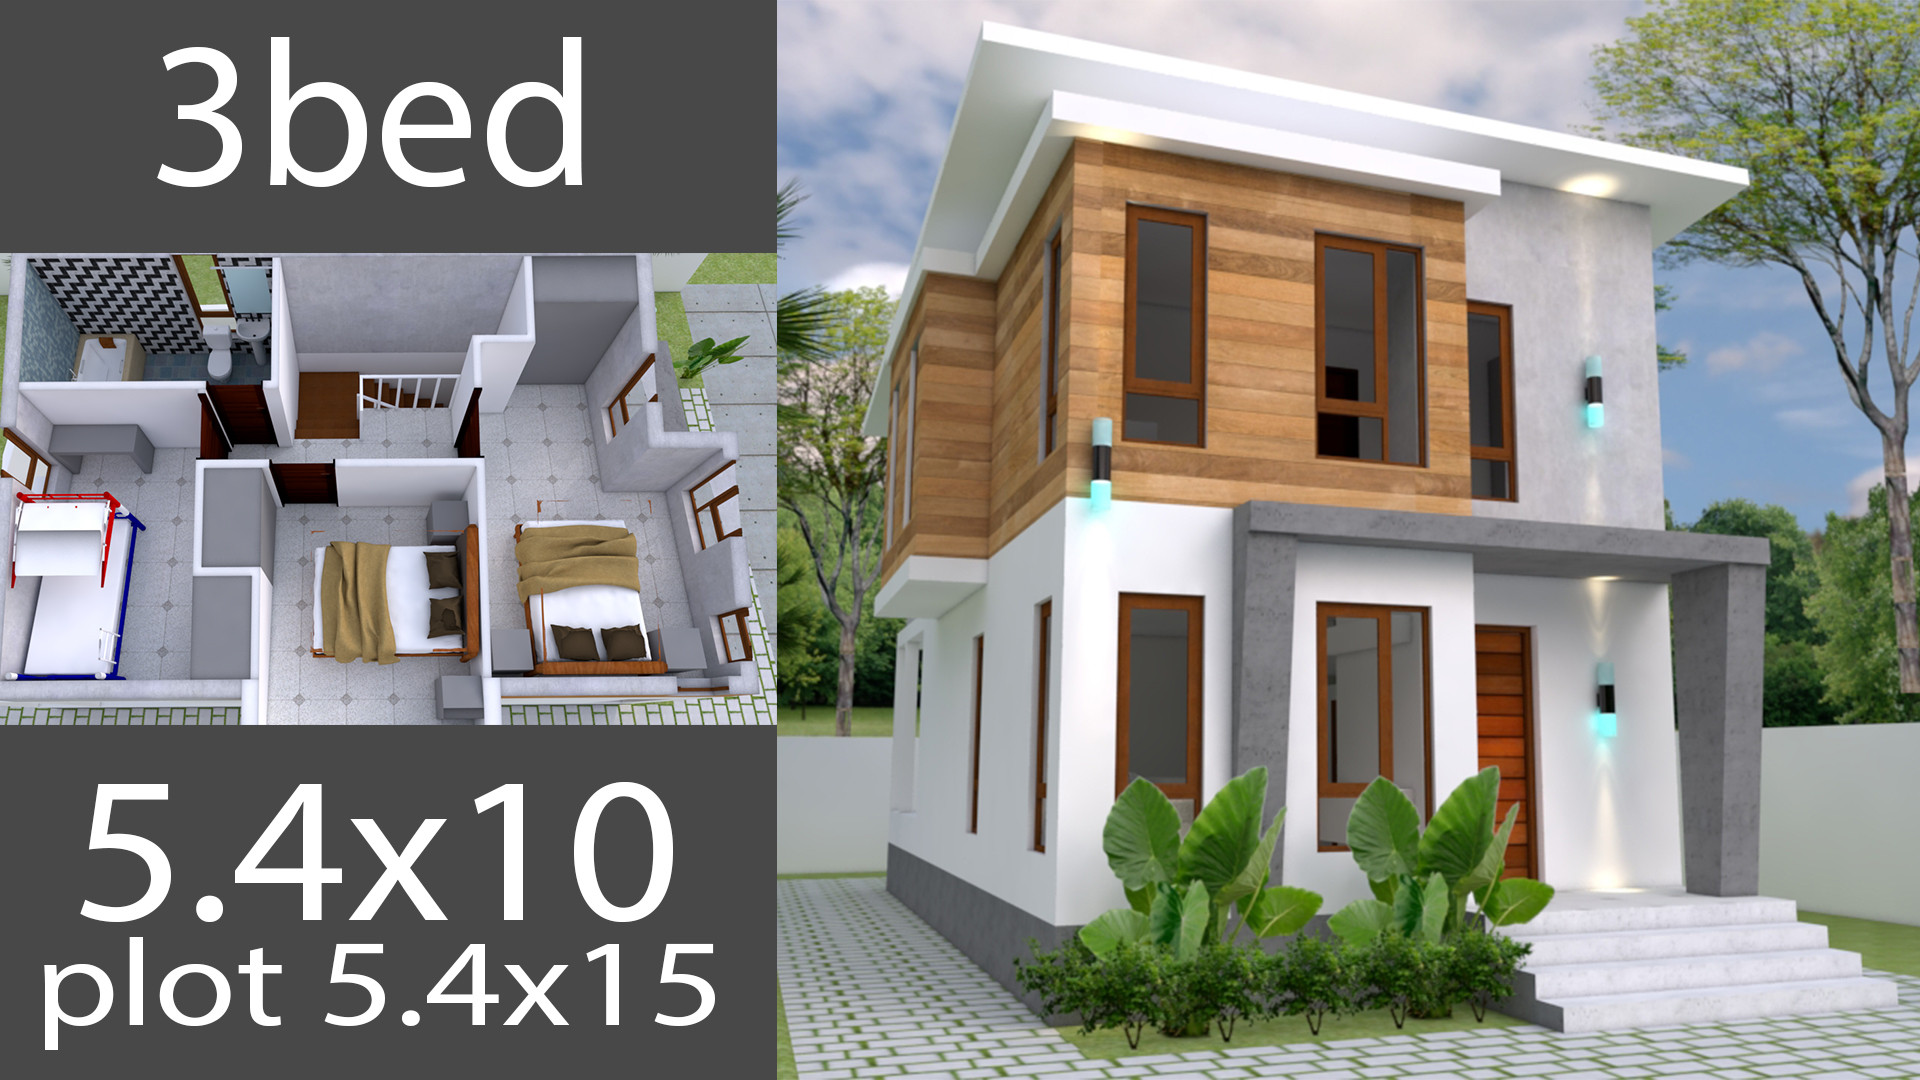 Small 4 Bedroom House Plans
 Small Home design Plan 5 4x10m with 3 Bedroom Samphoas